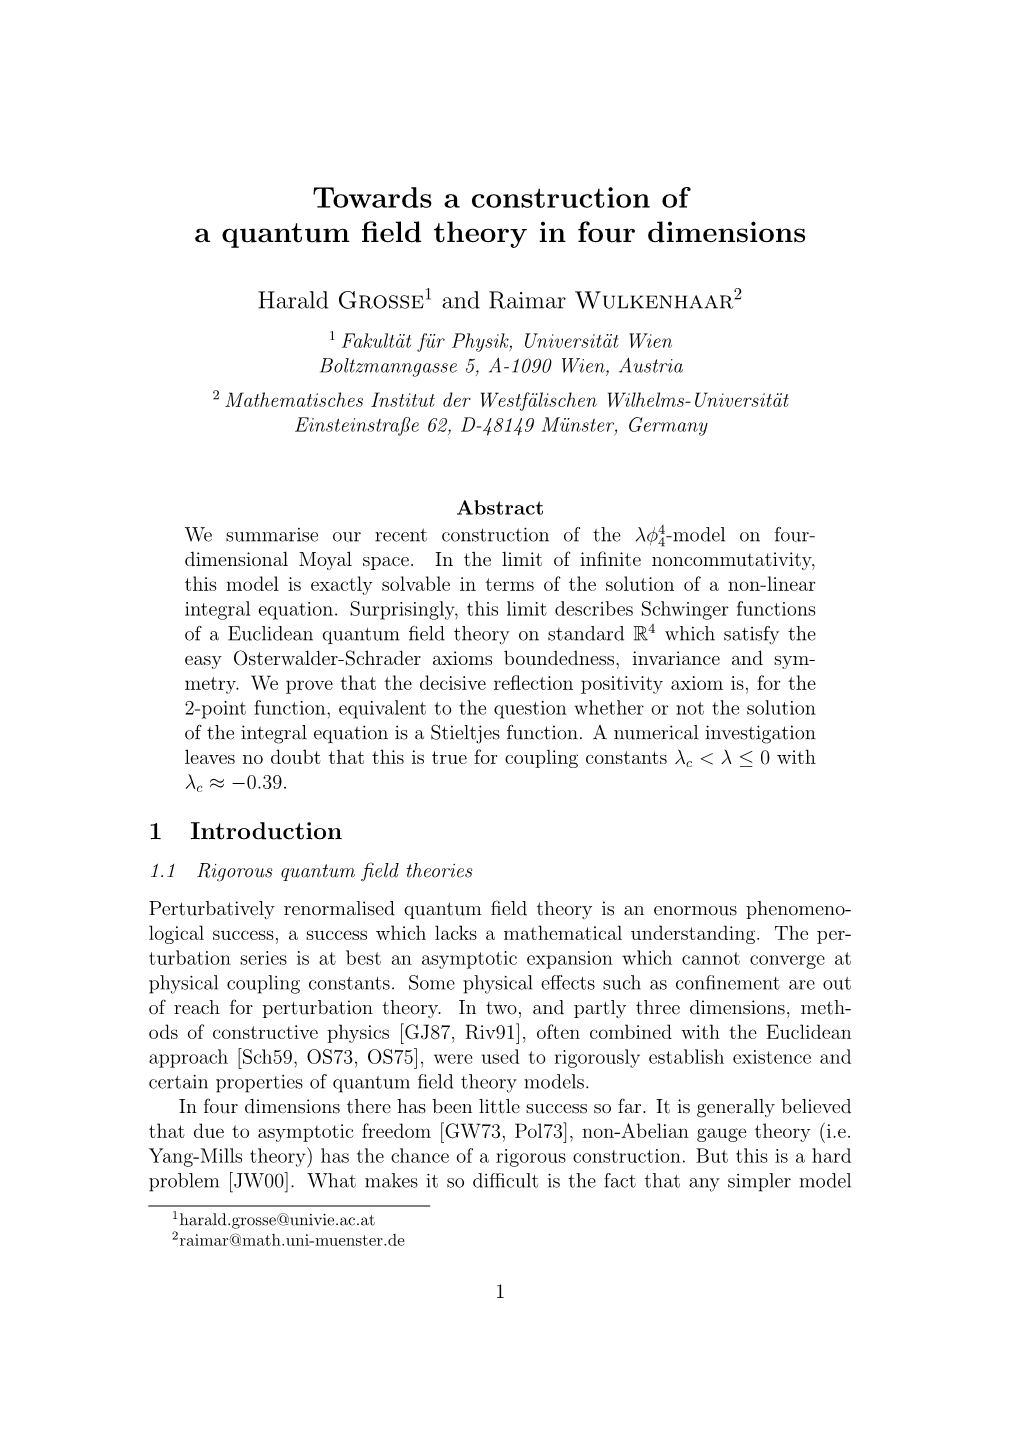 Towards a Construction of a Quantum Field Theory in Four Dimensions